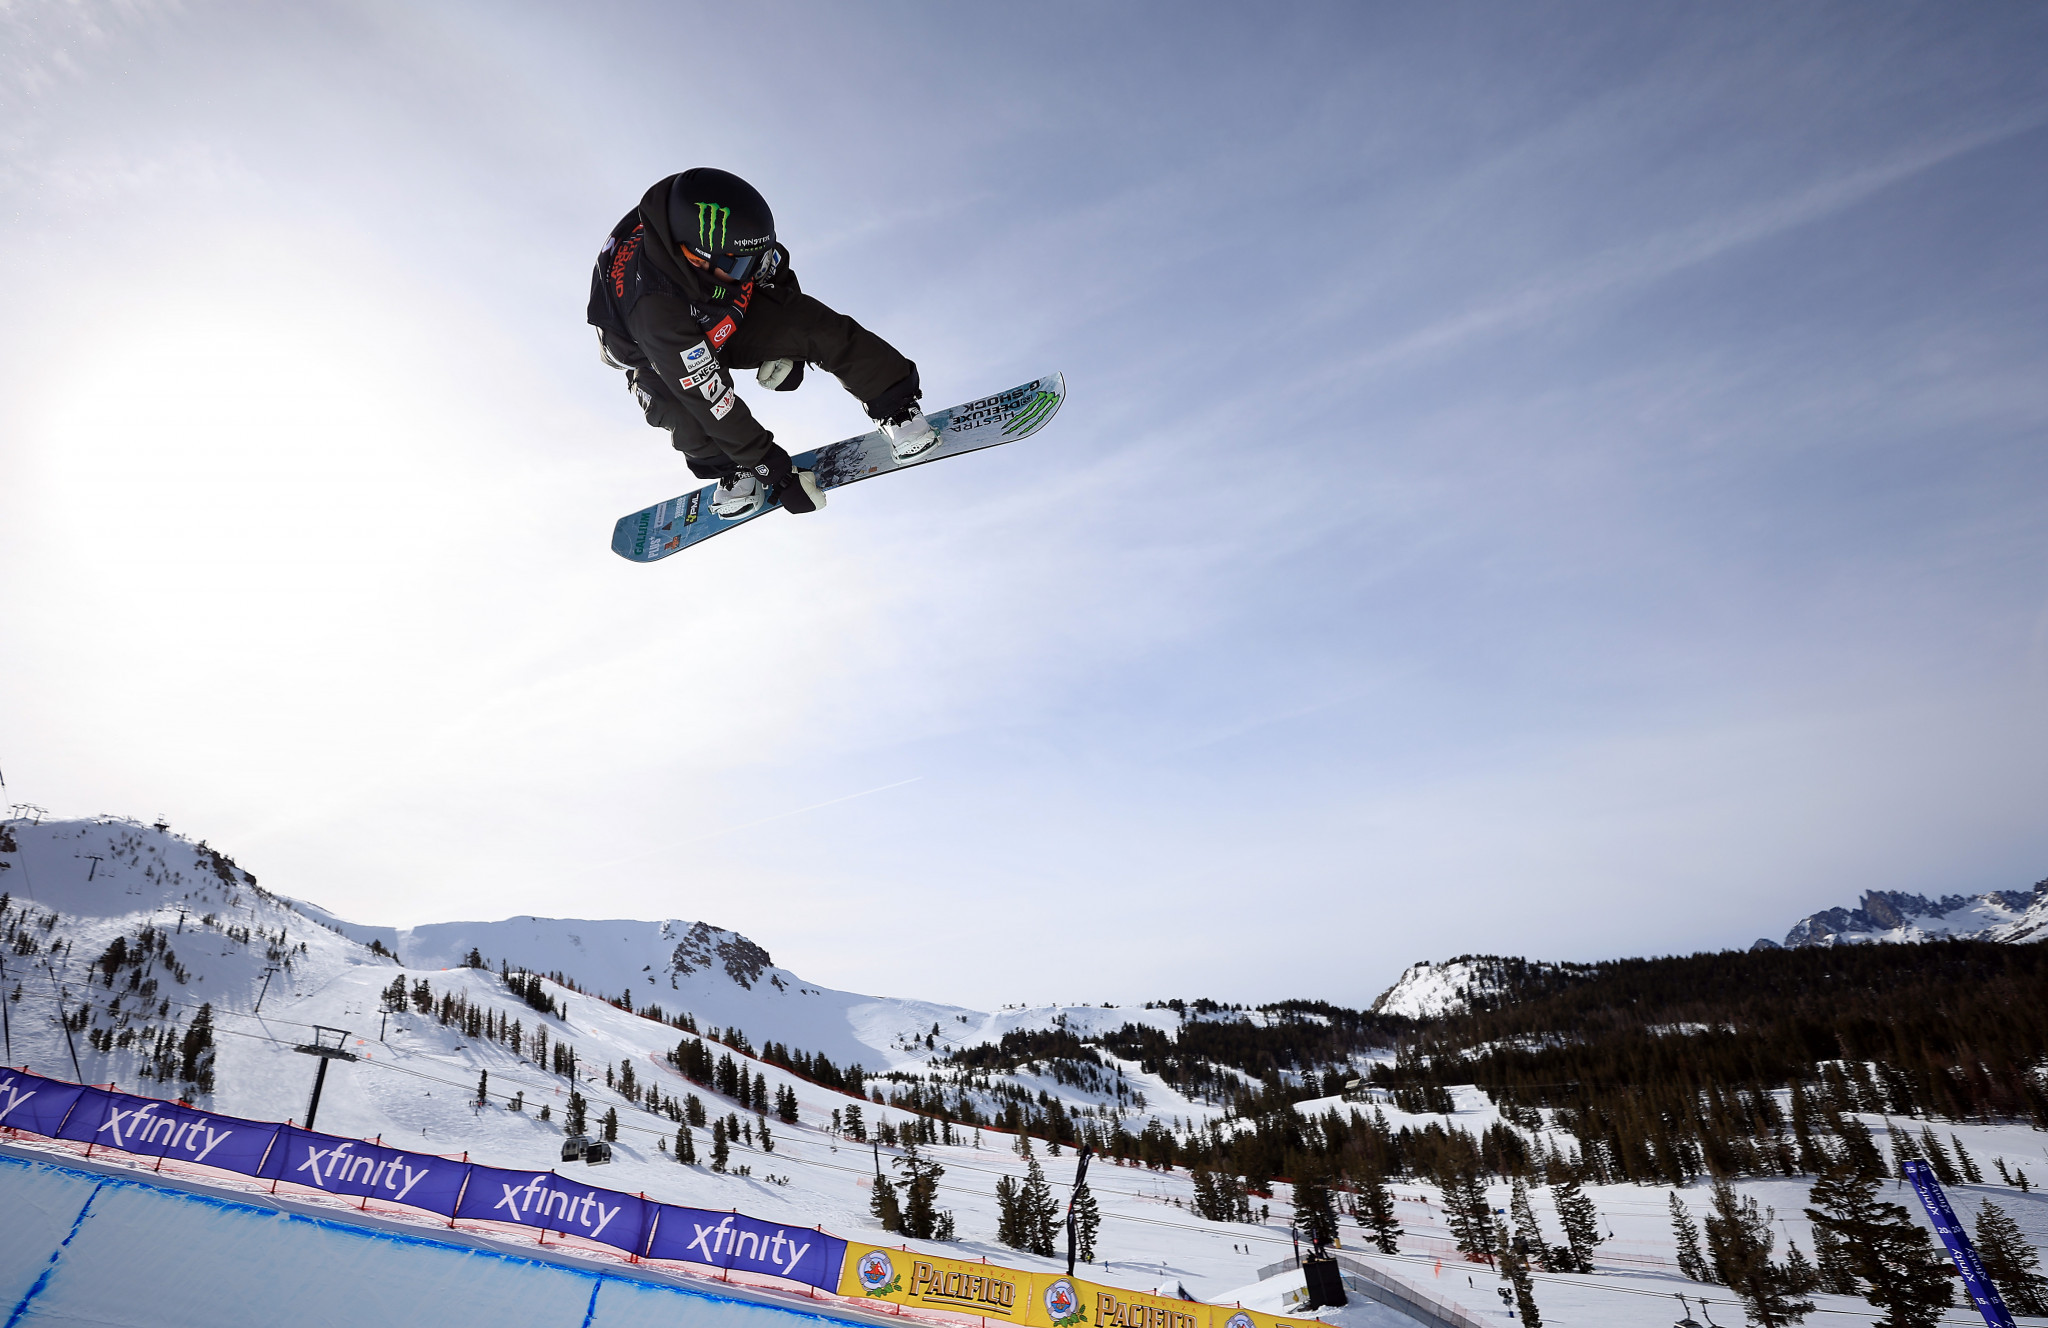 Japanese snowboarders top men’s and women’s halfpipe qualifying at Mammoth Mountain World Cup